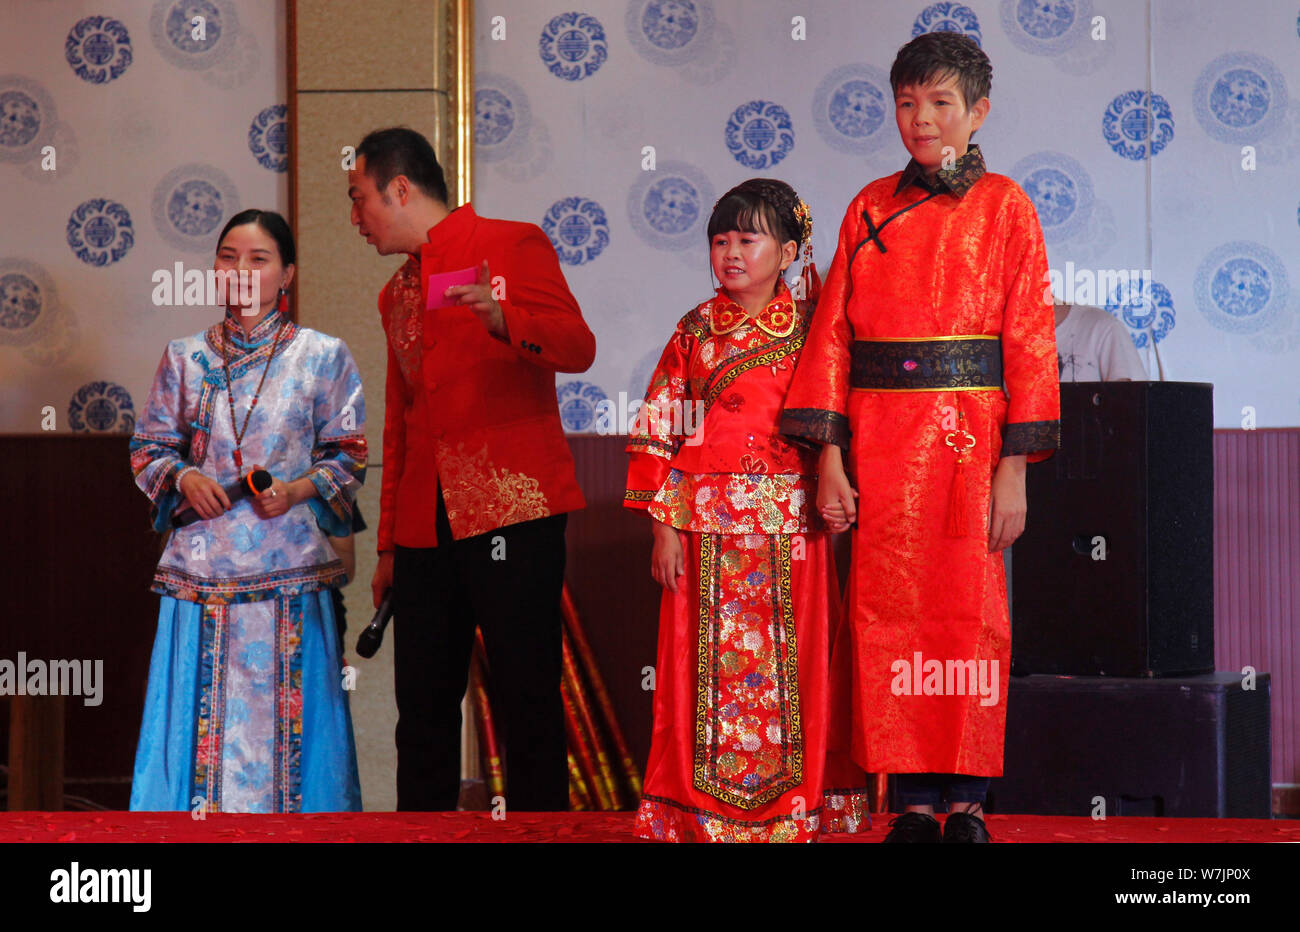 38 Year Old Chinese Bride Fei Yongling Dressed In Traditional Costumes Front Left Who Is 4